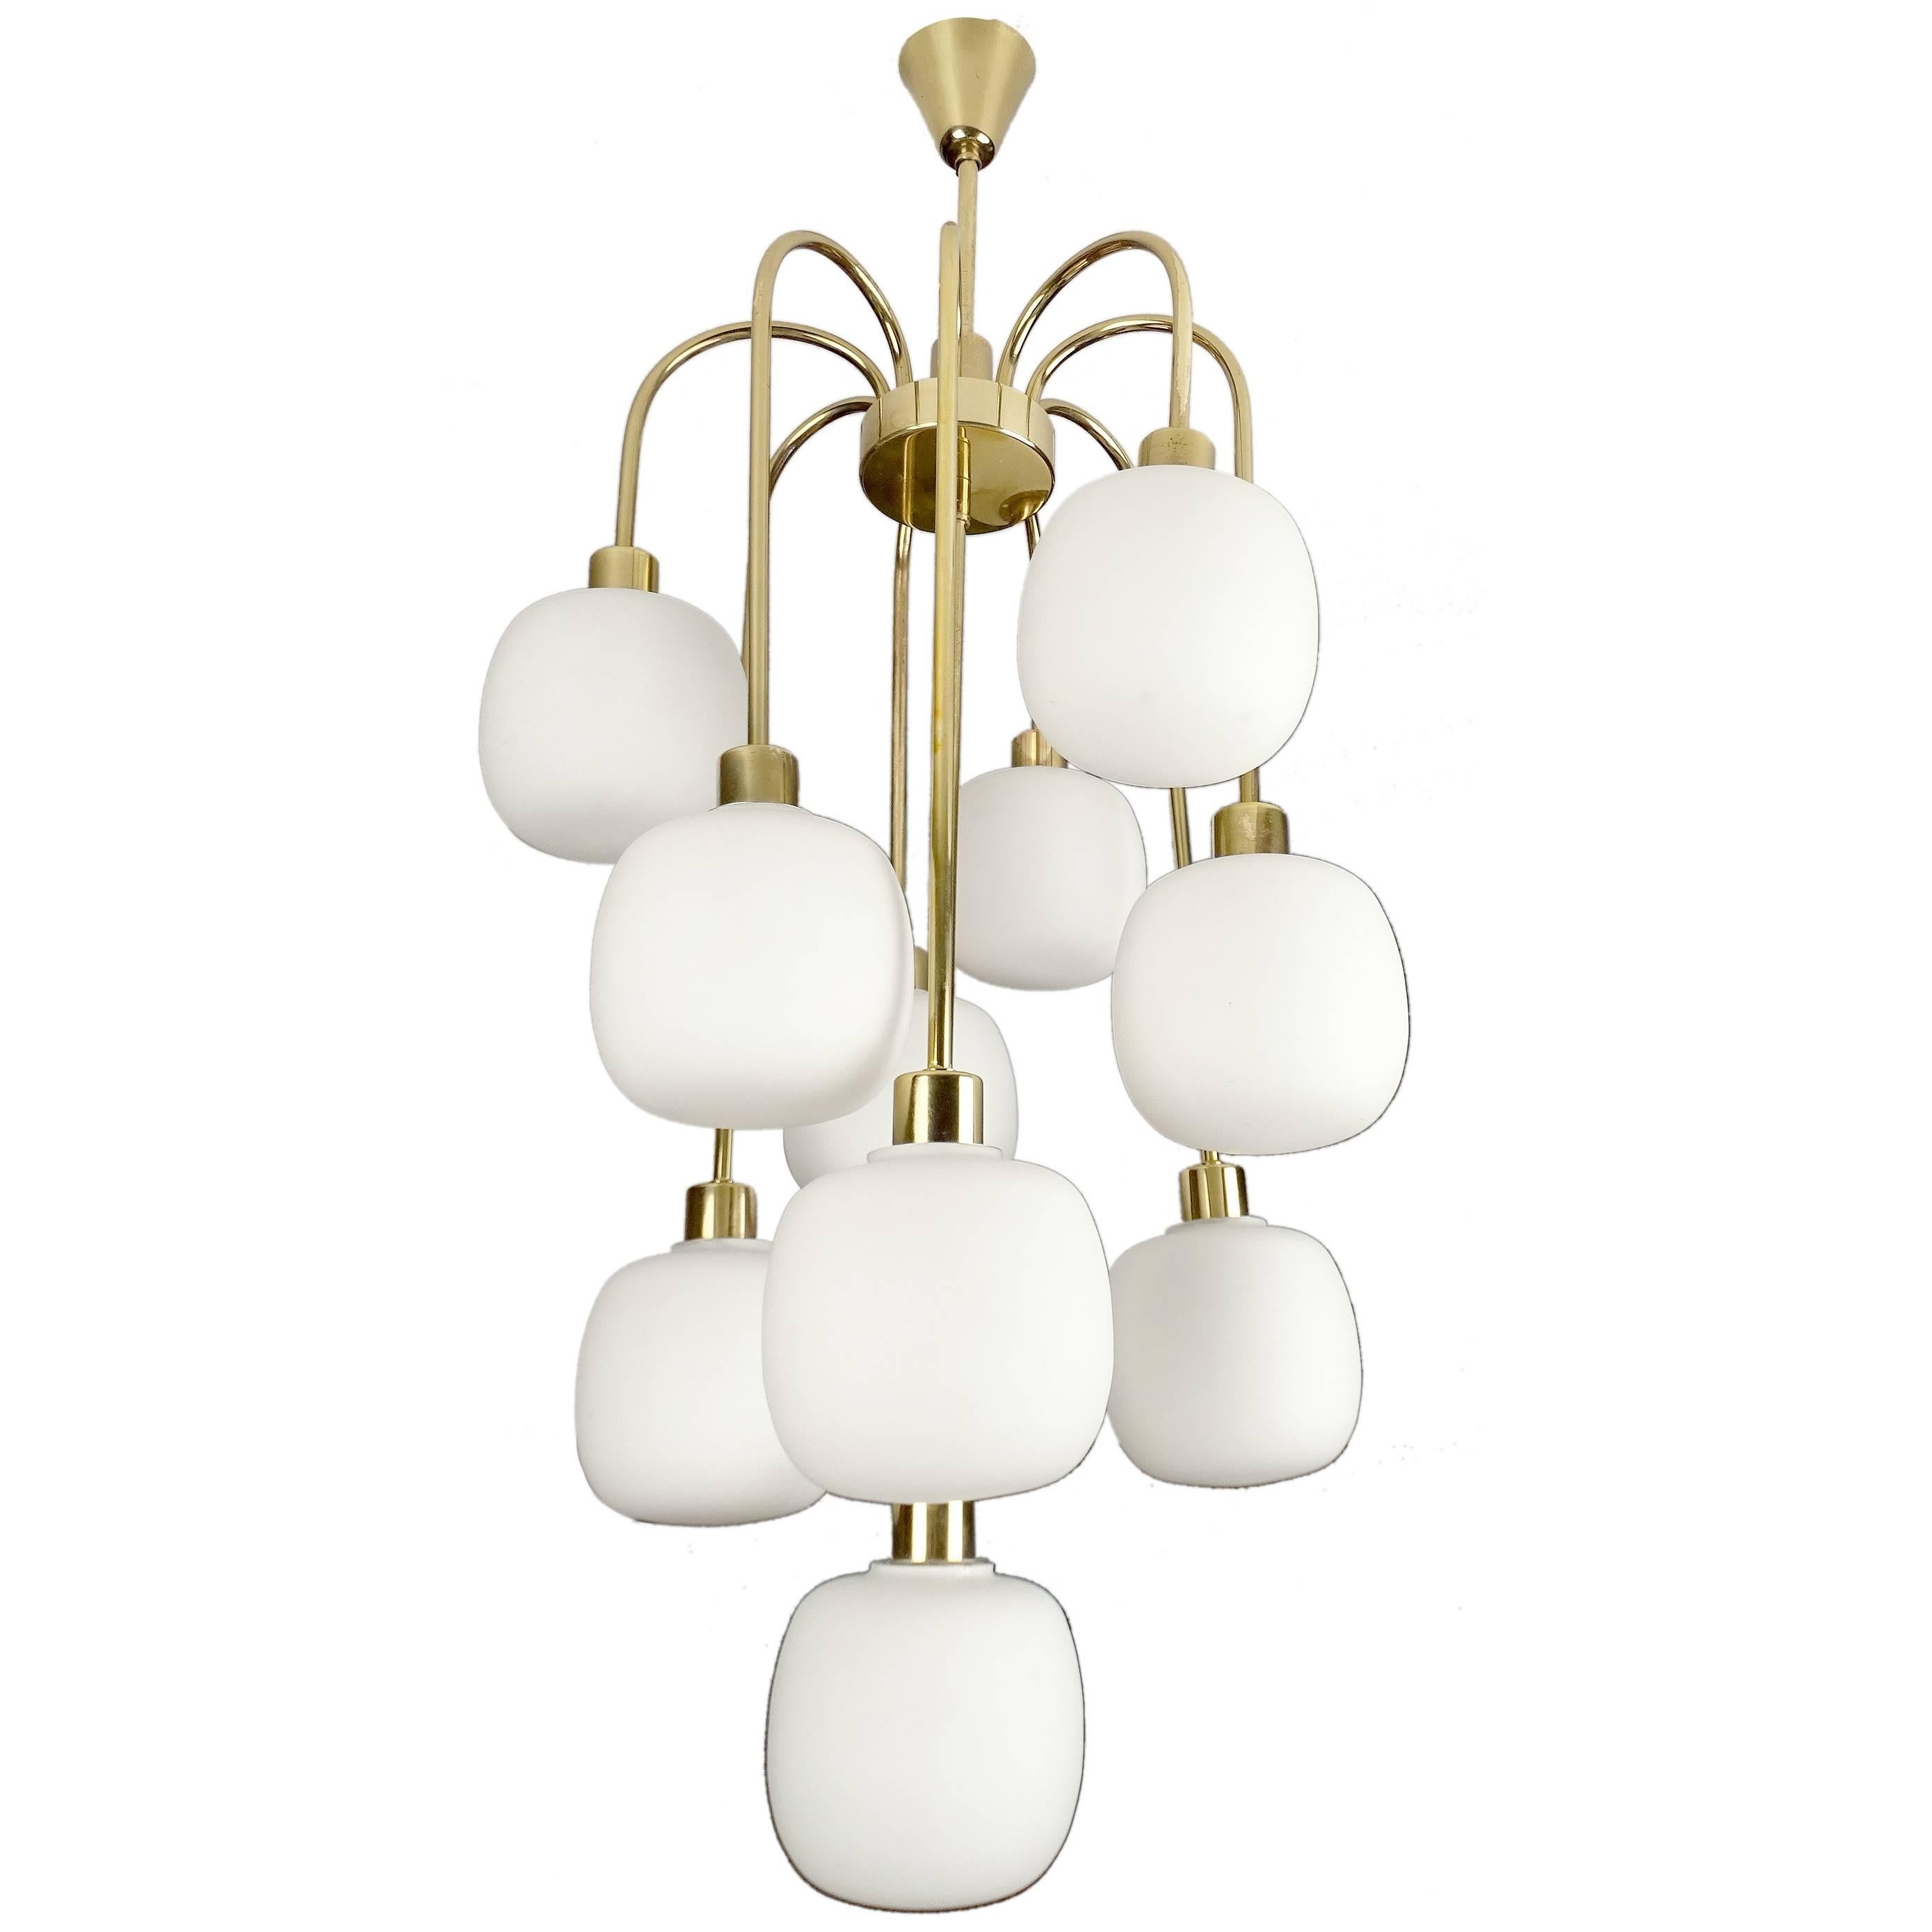 Very unusual Italian midcentury Cascade style chandelier, featuring nine glass globes on a waterfall four-tier brass structure.

Dimensions
33.07 in. H / 84 cm H
Diameter
14.57 in. (37 cm)

Nine candelabra size bulbs, 40 watts each, LED